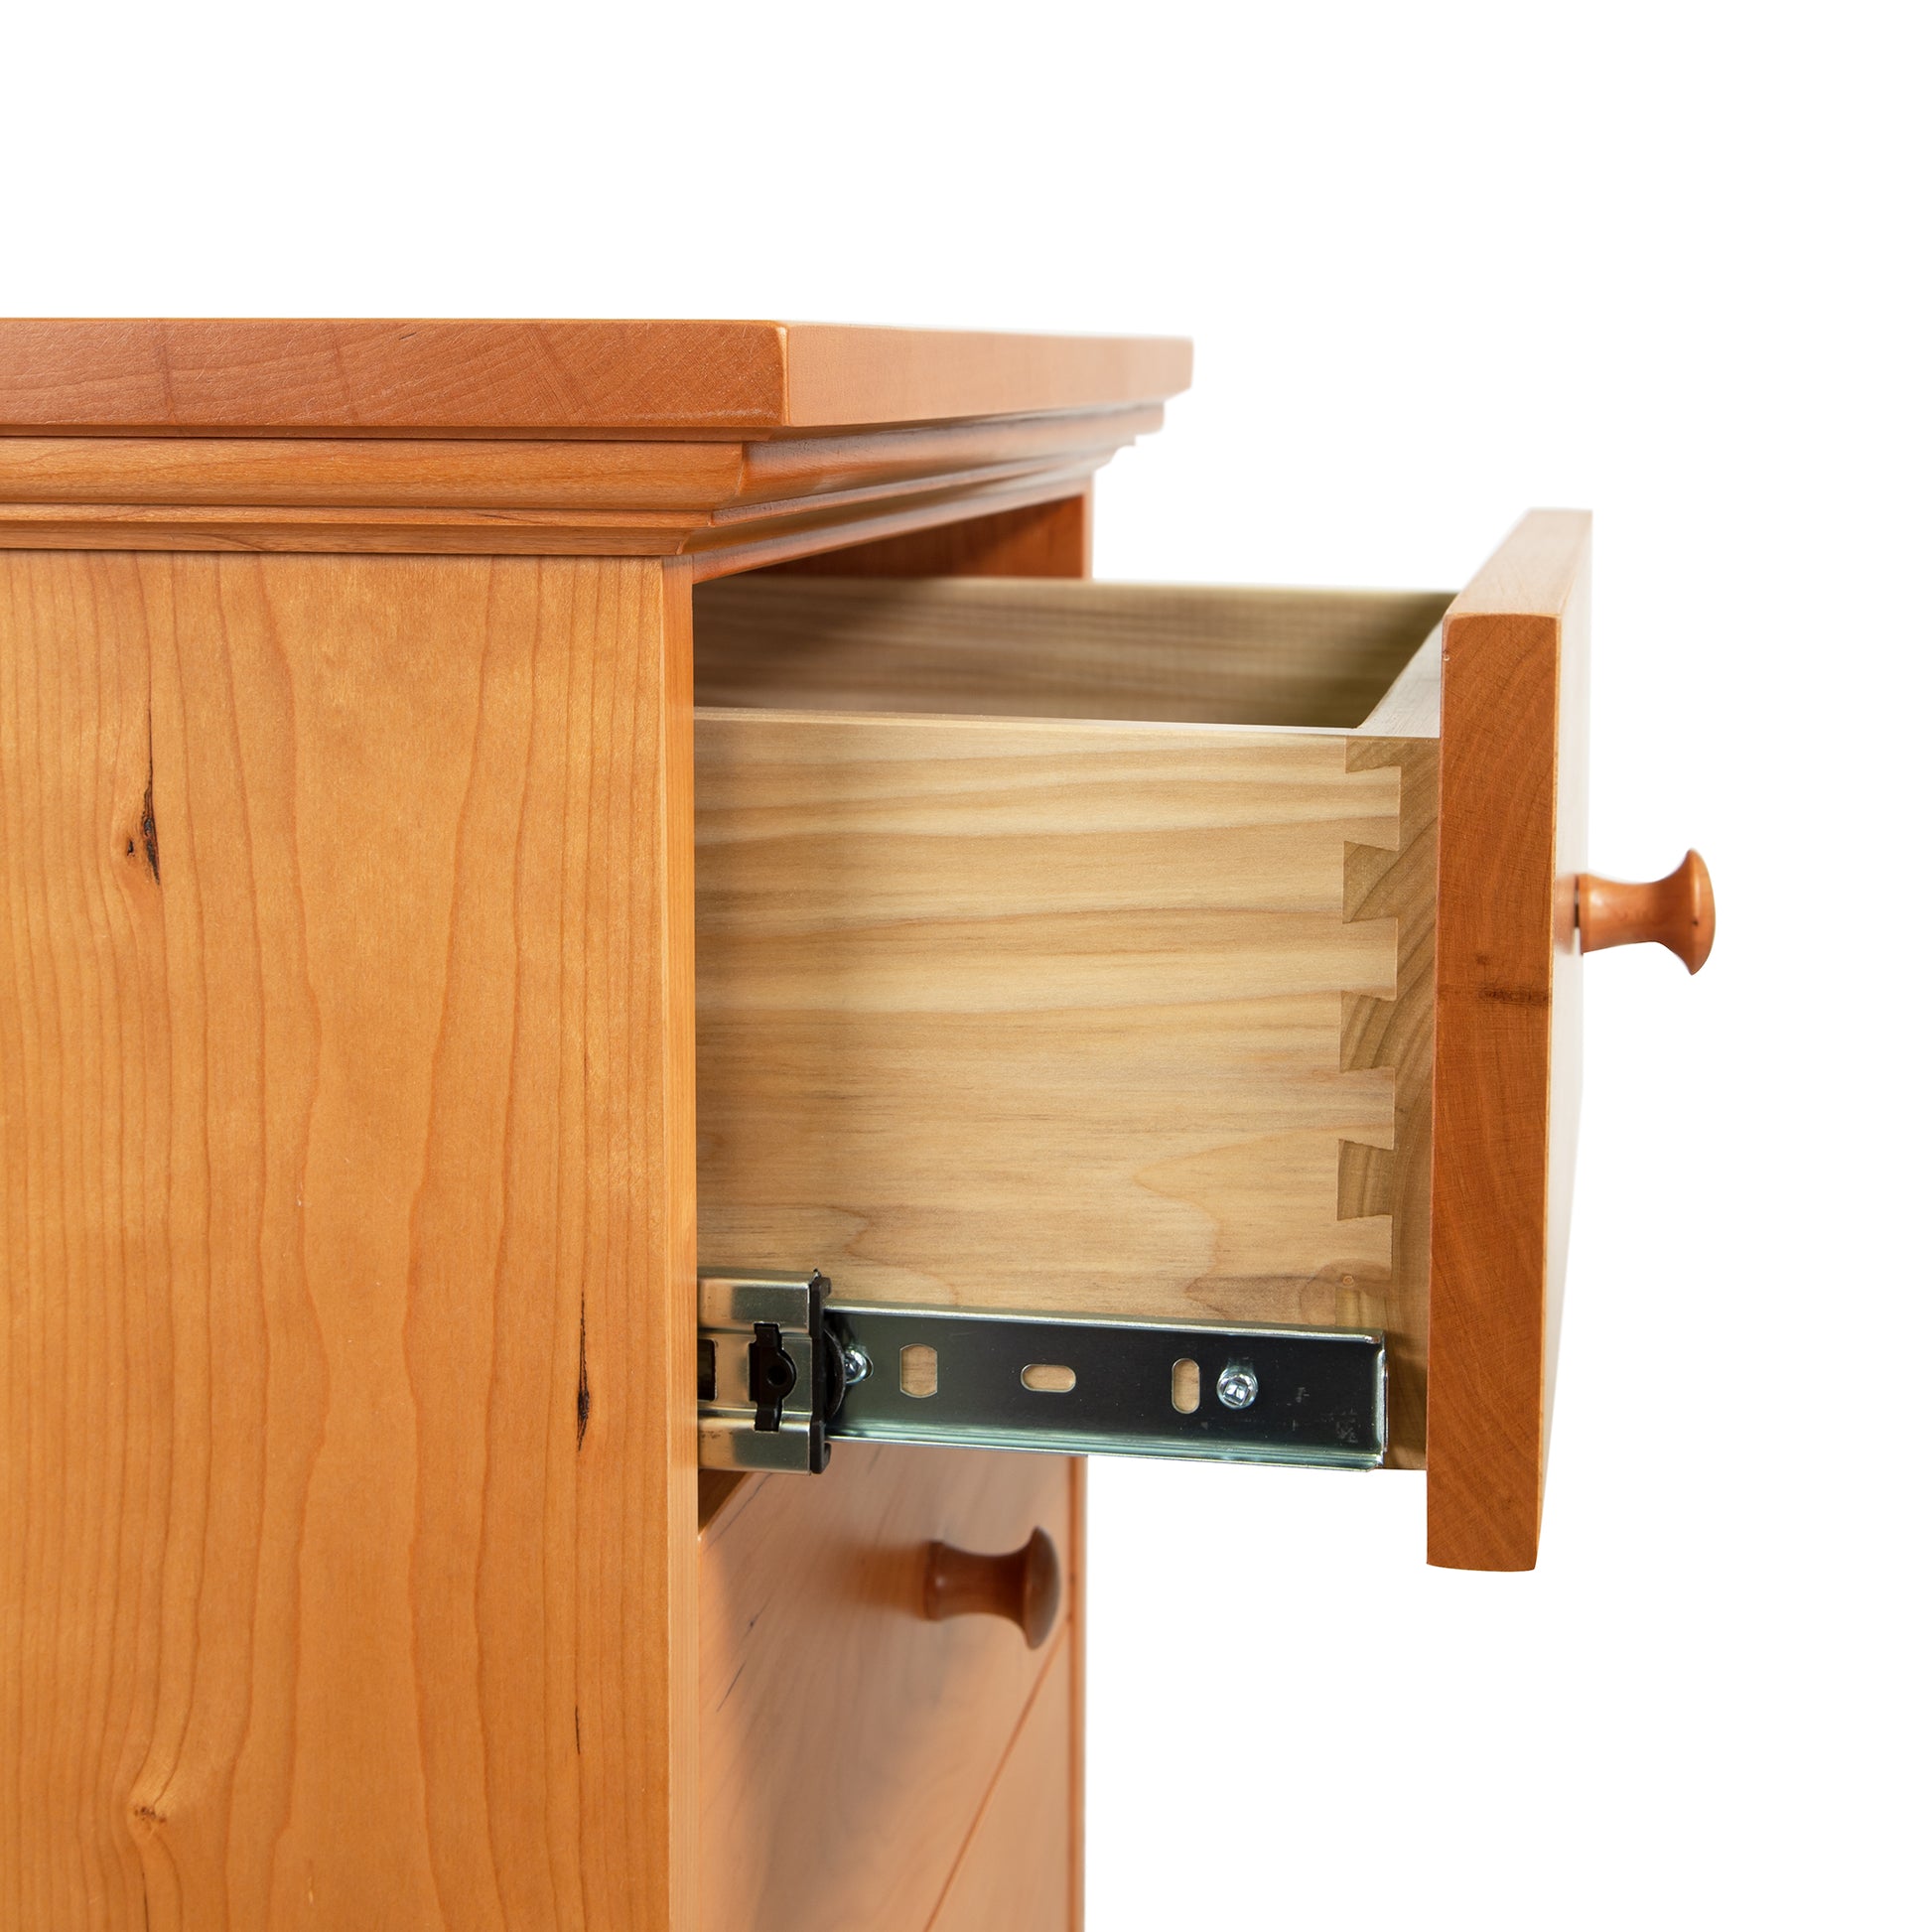 A drawer is open in a wooden dresser.